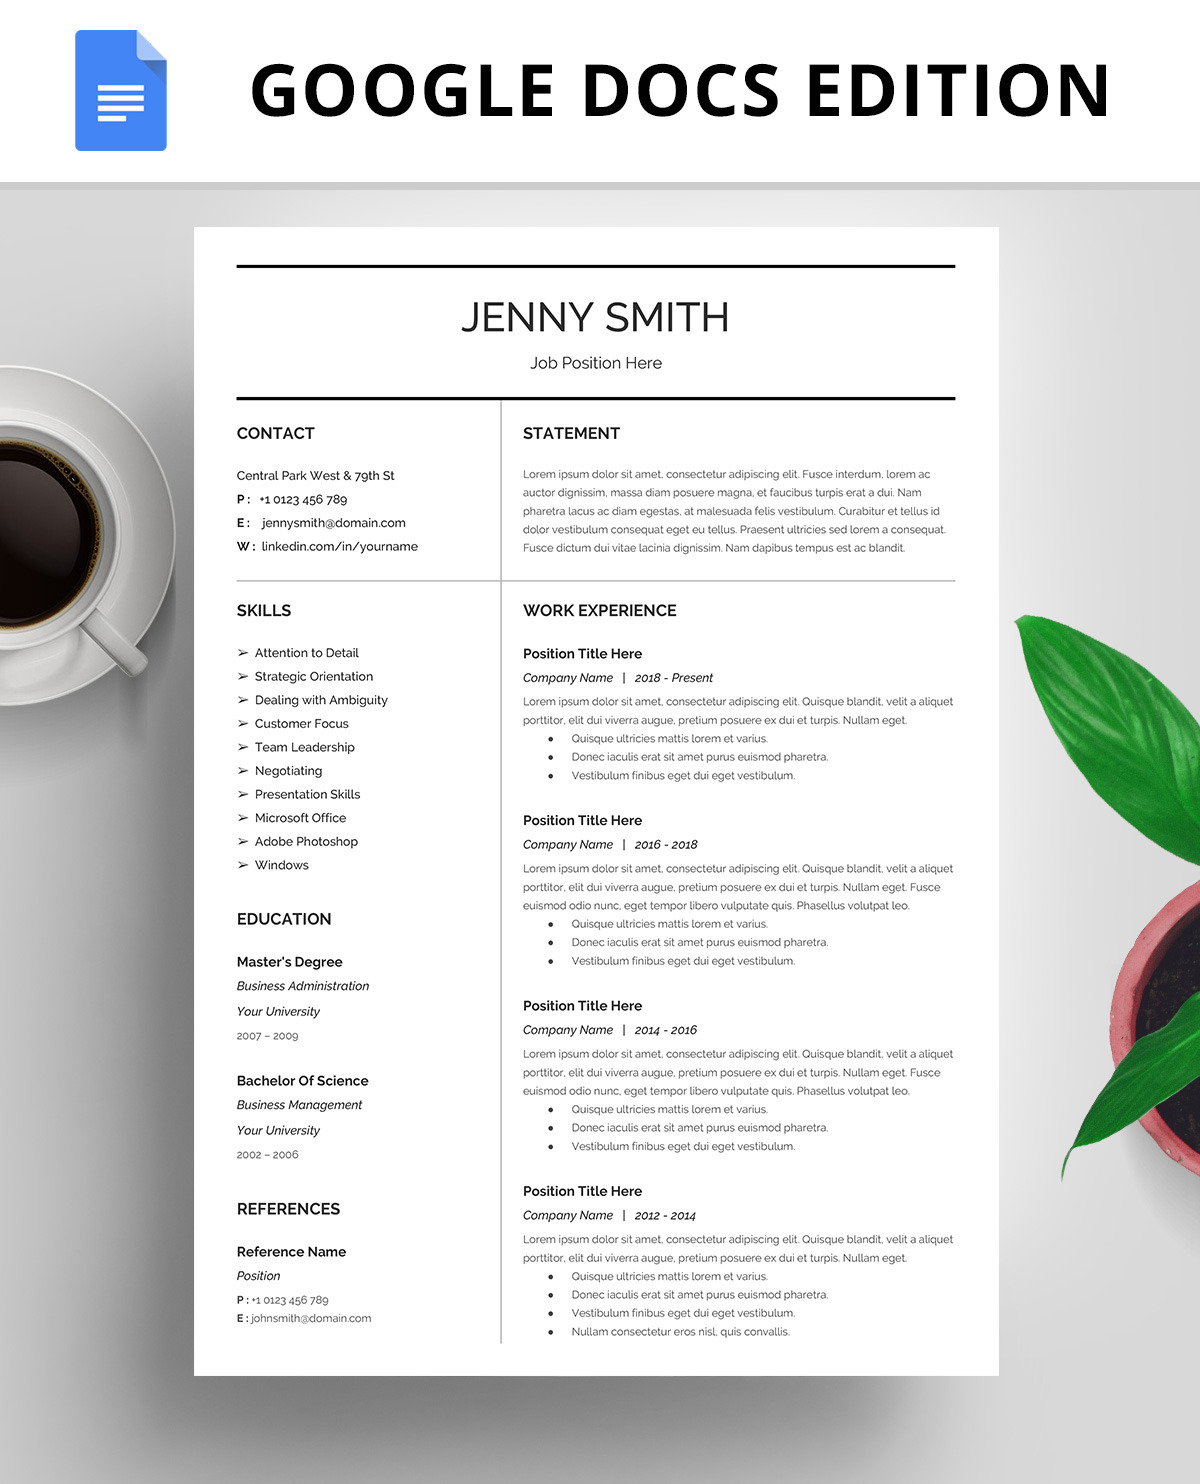 Google Resume Templates / A Simple Google Docs Resume Template And